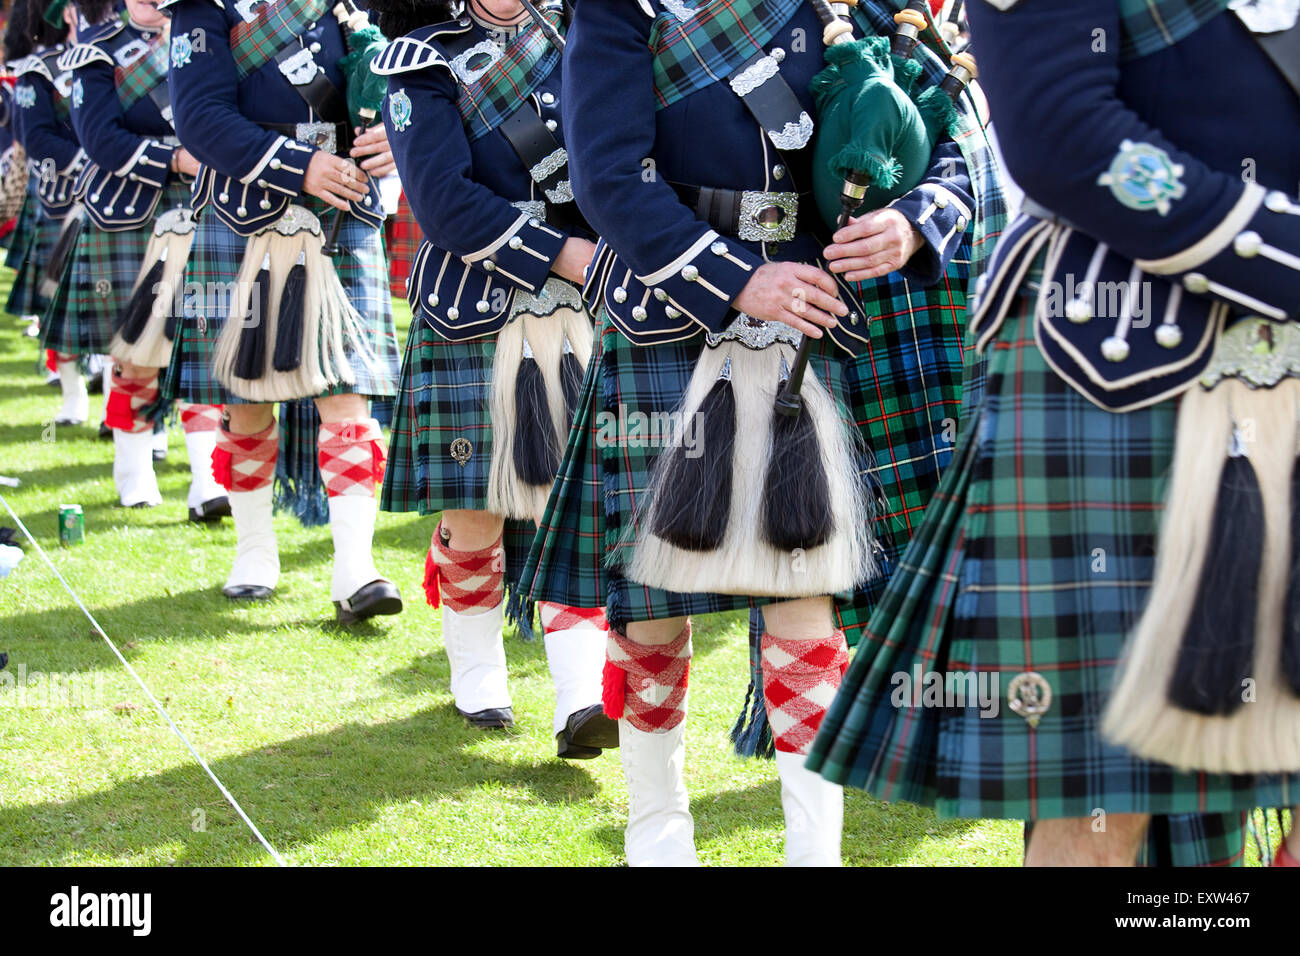 Ballater, Scotland - August 9th, 2012: Massed Pipe Bands at the Ballater Highland Games event in Scotland. Stock Photo